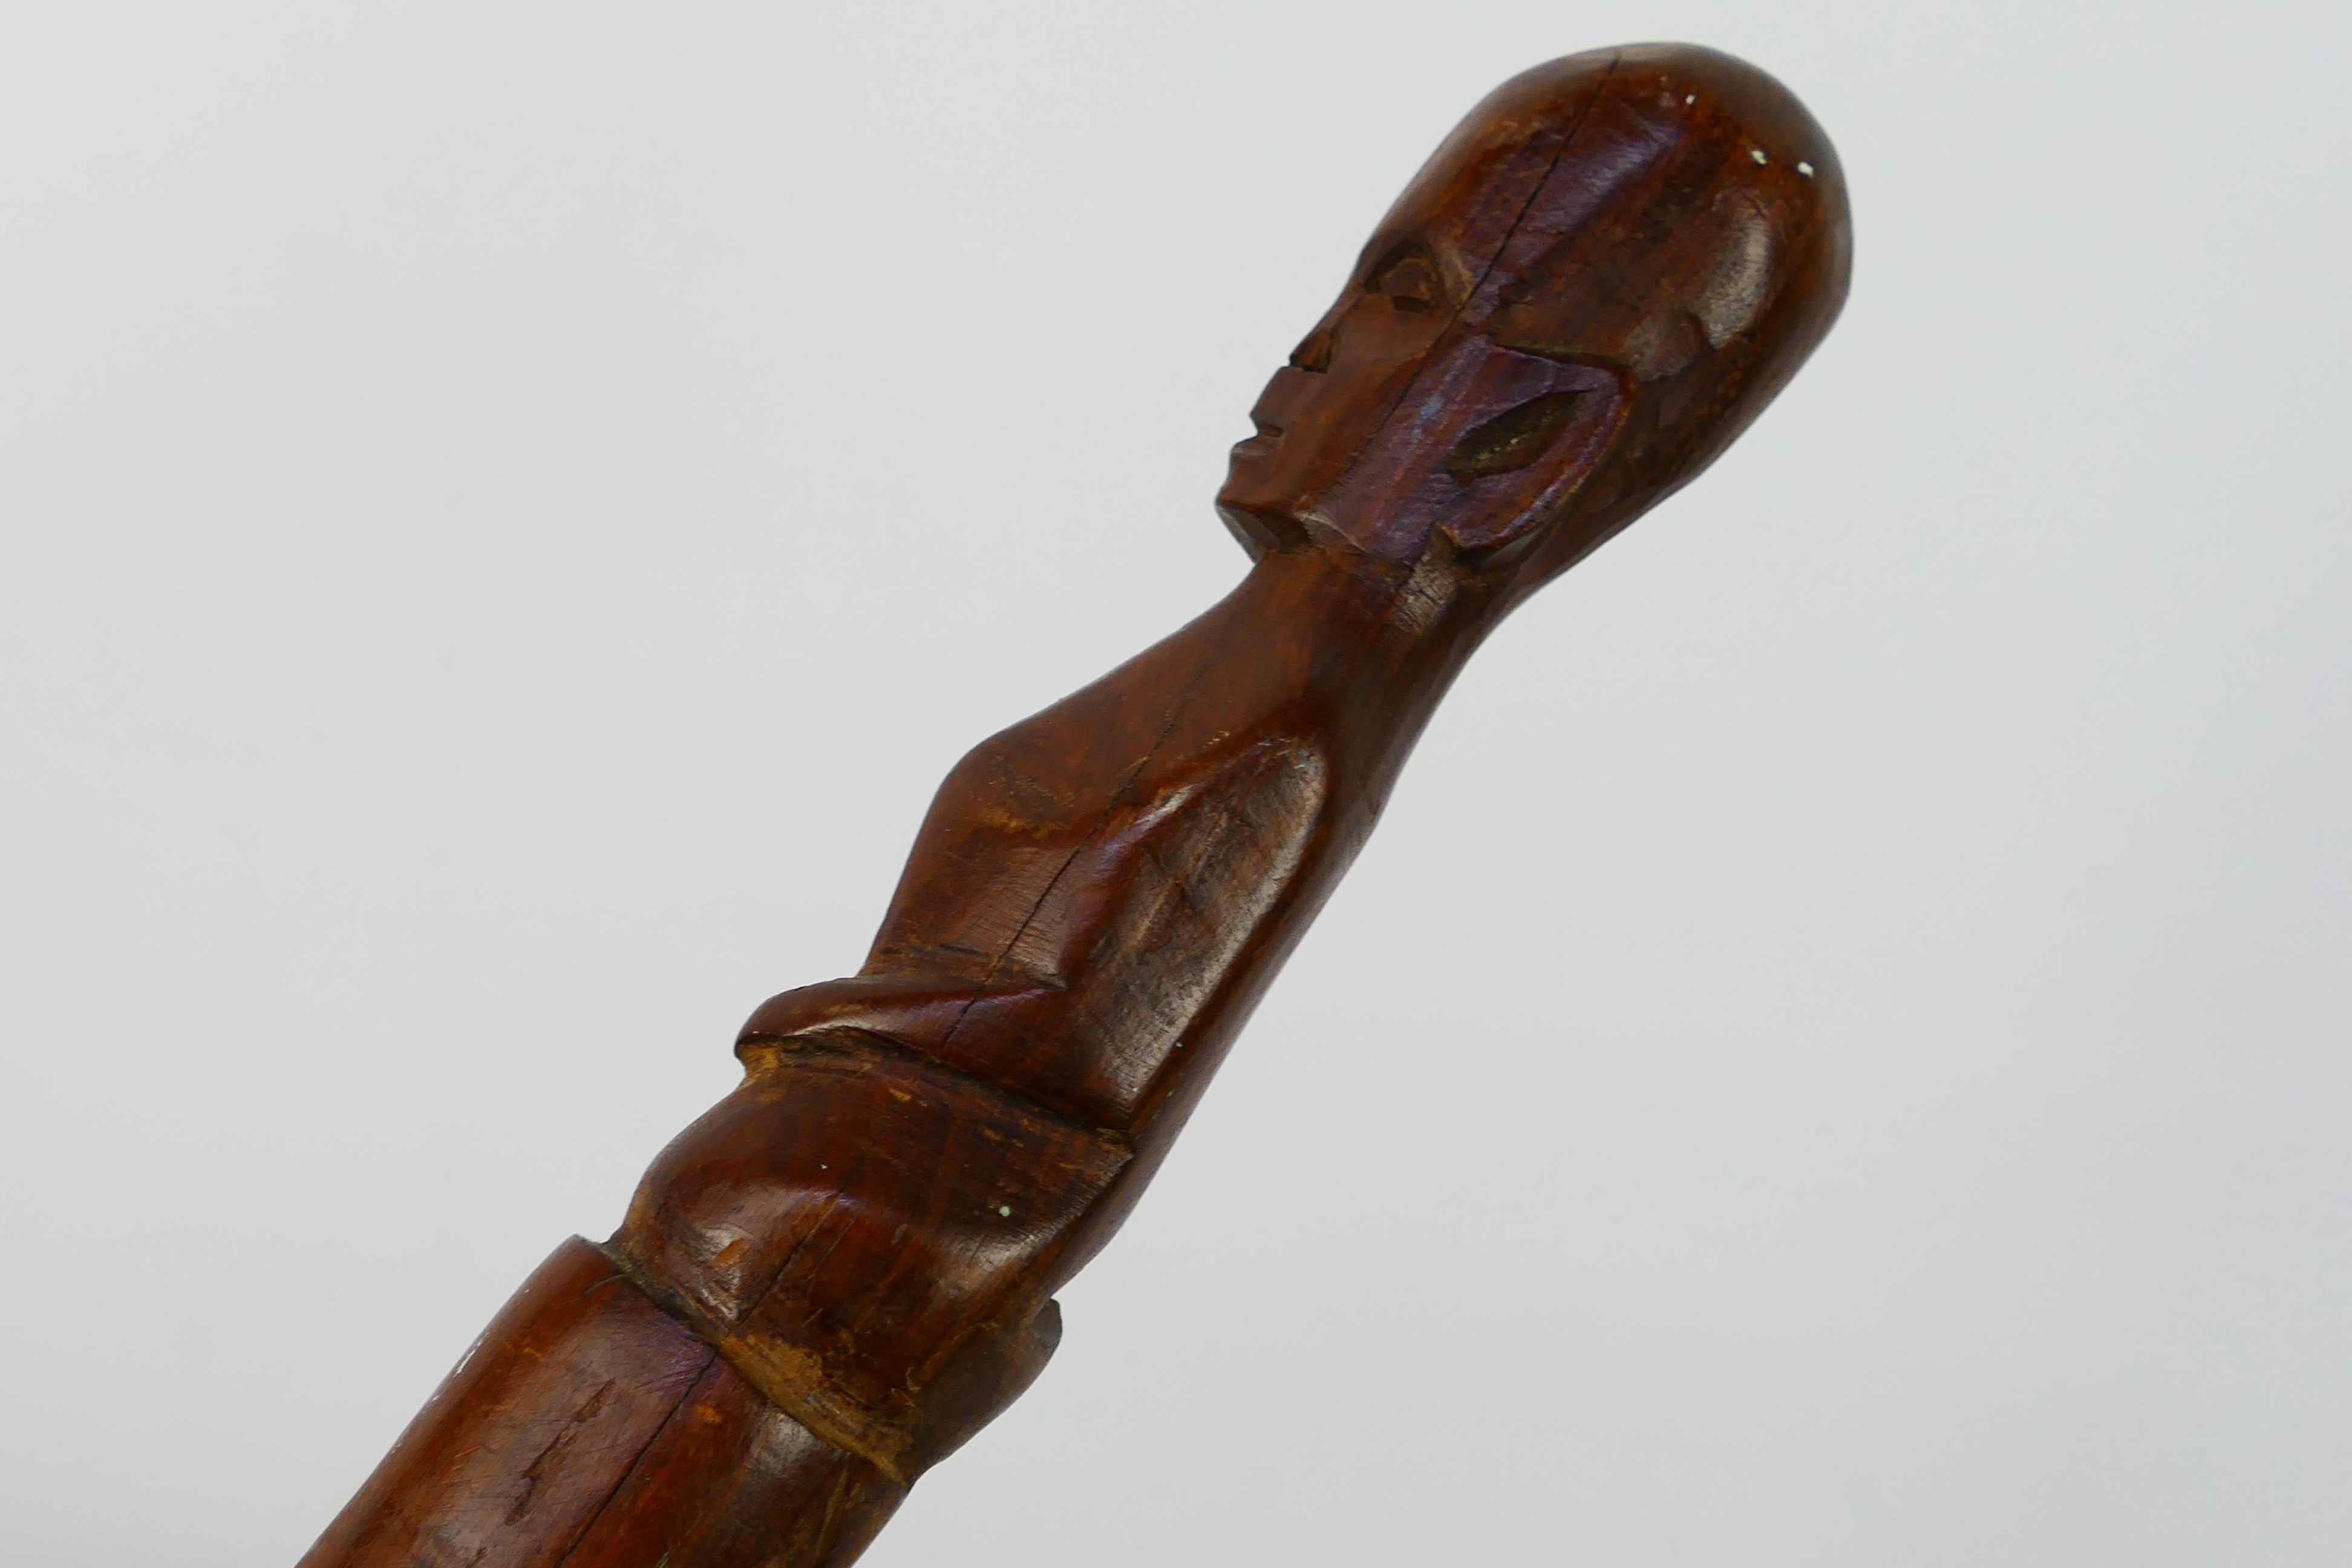 An axe with 79 cm (l) haft, 16 cm head, African tribal stick and a copper mounted walking stick. - Image 8 of 12